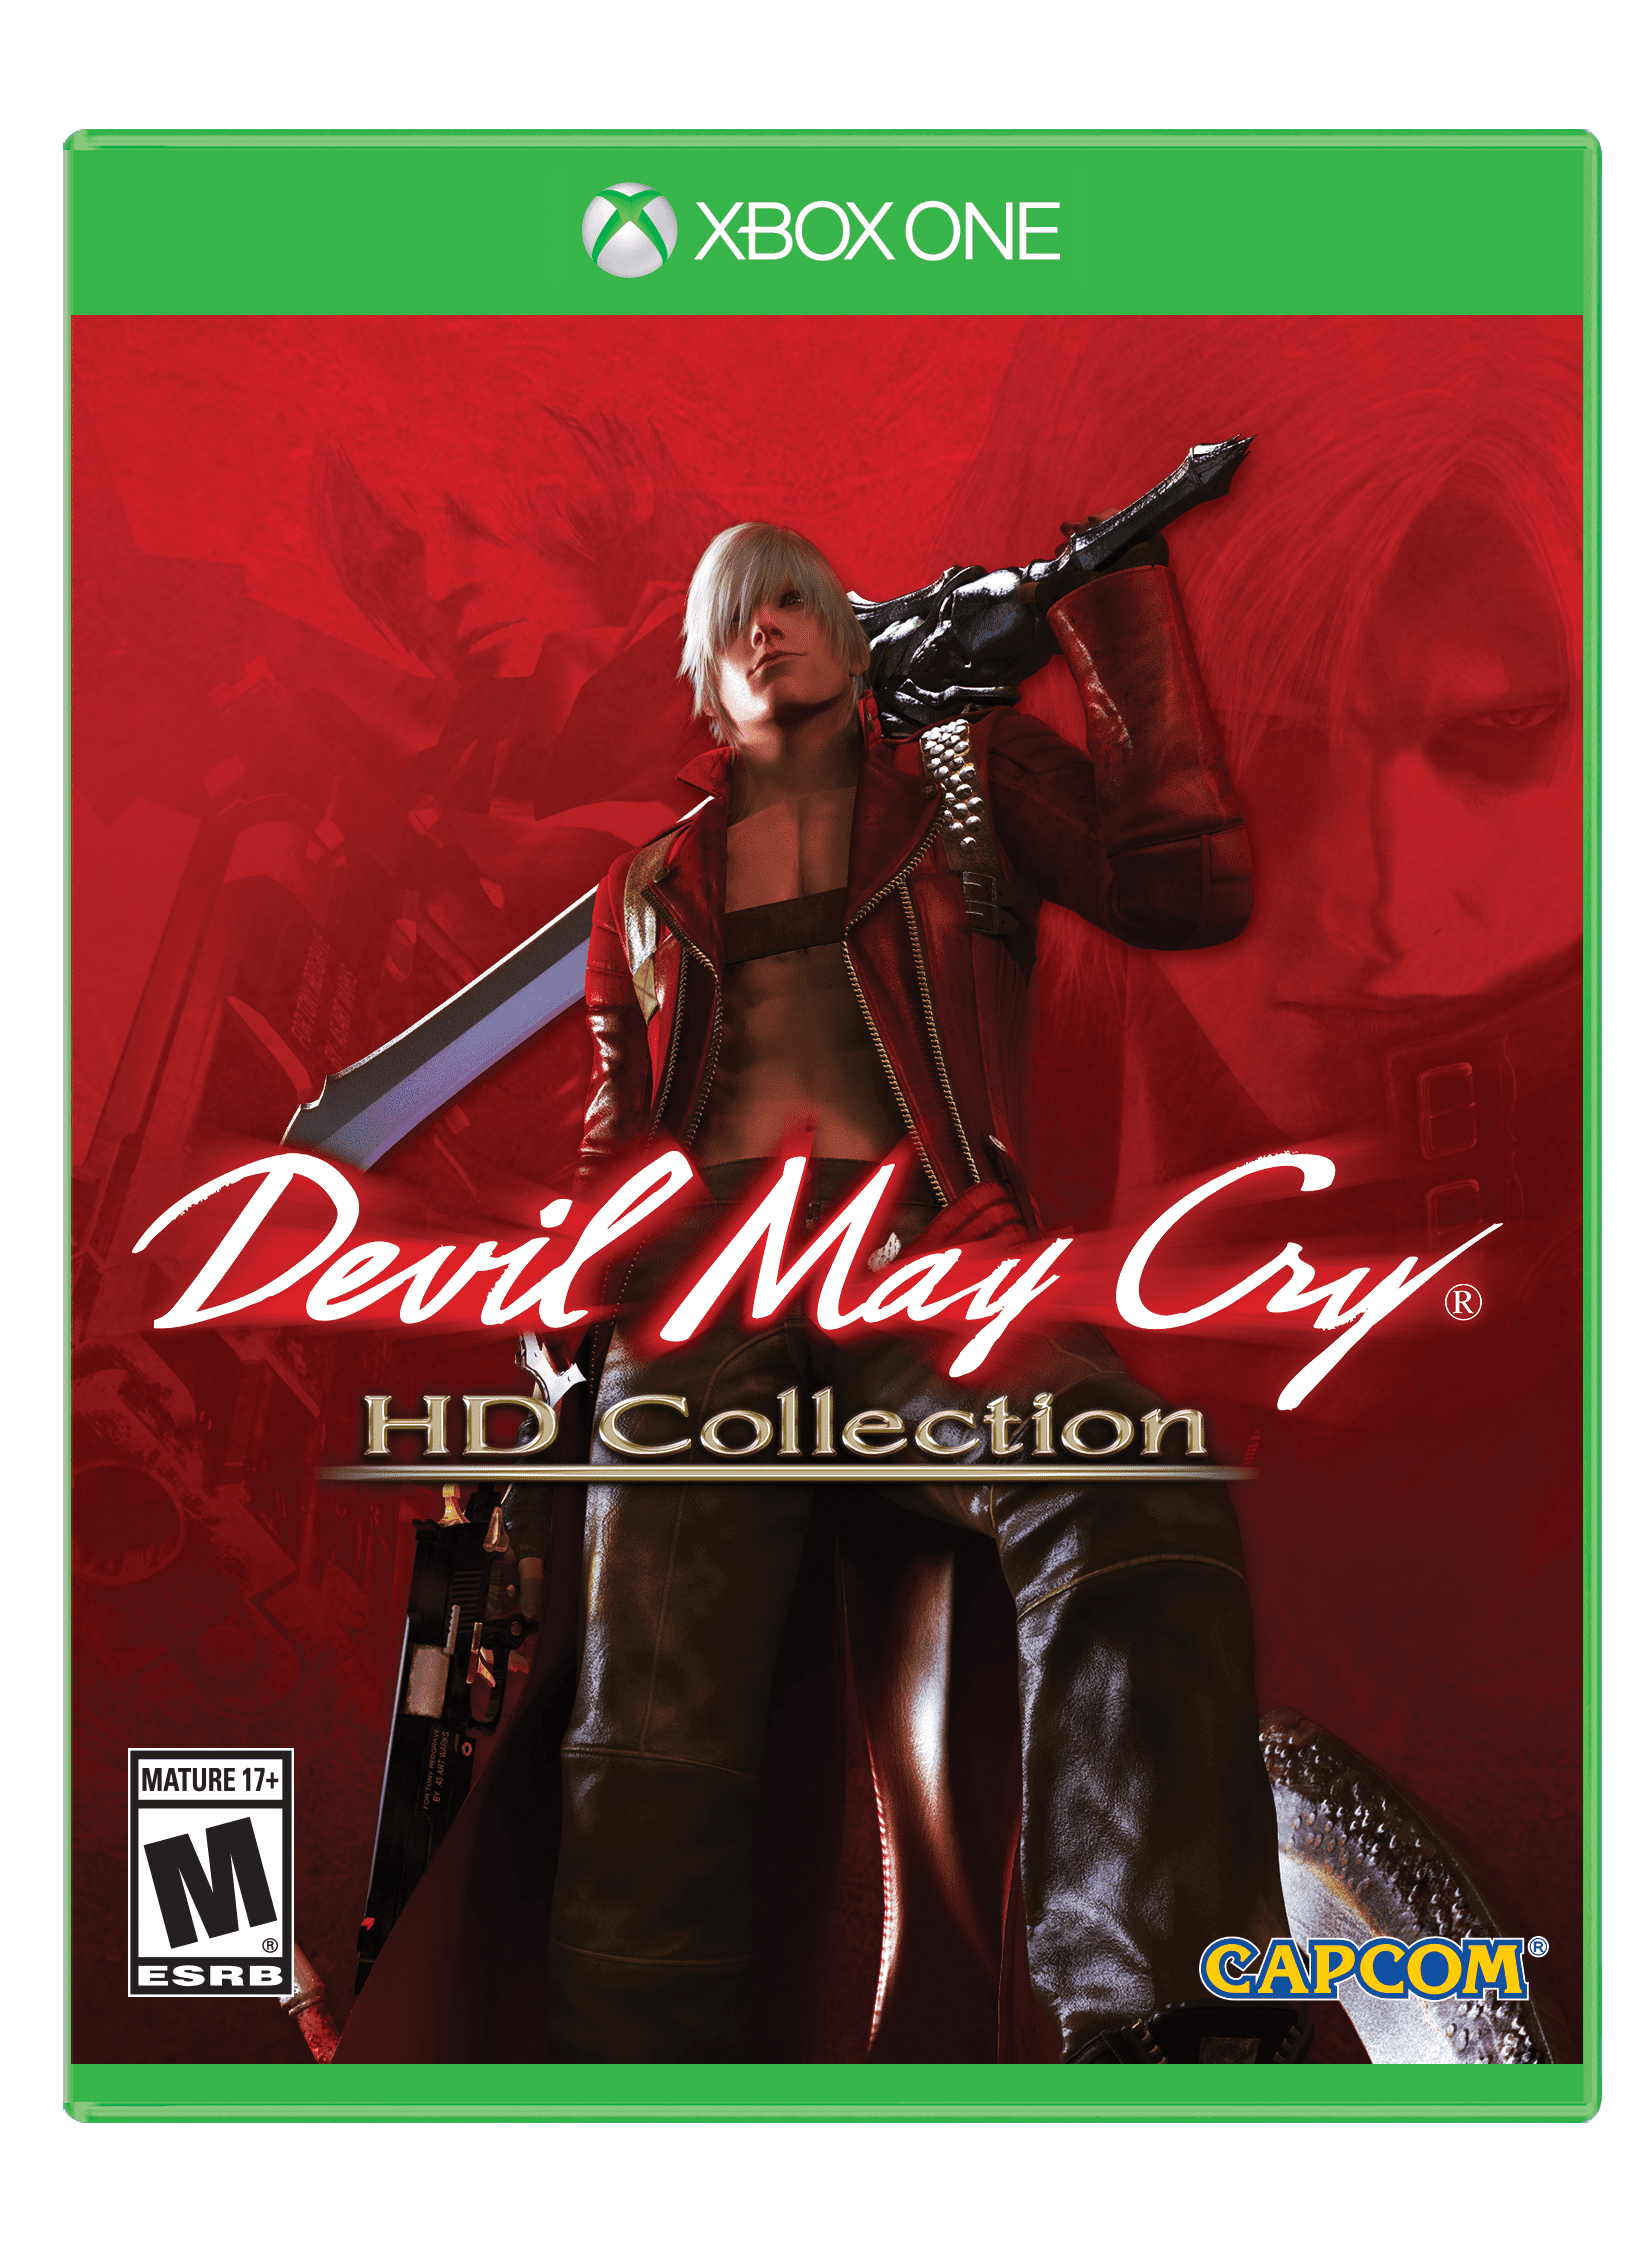 Out of these 3 PS2 DMC games, which is the best? : r/DevilMayCry